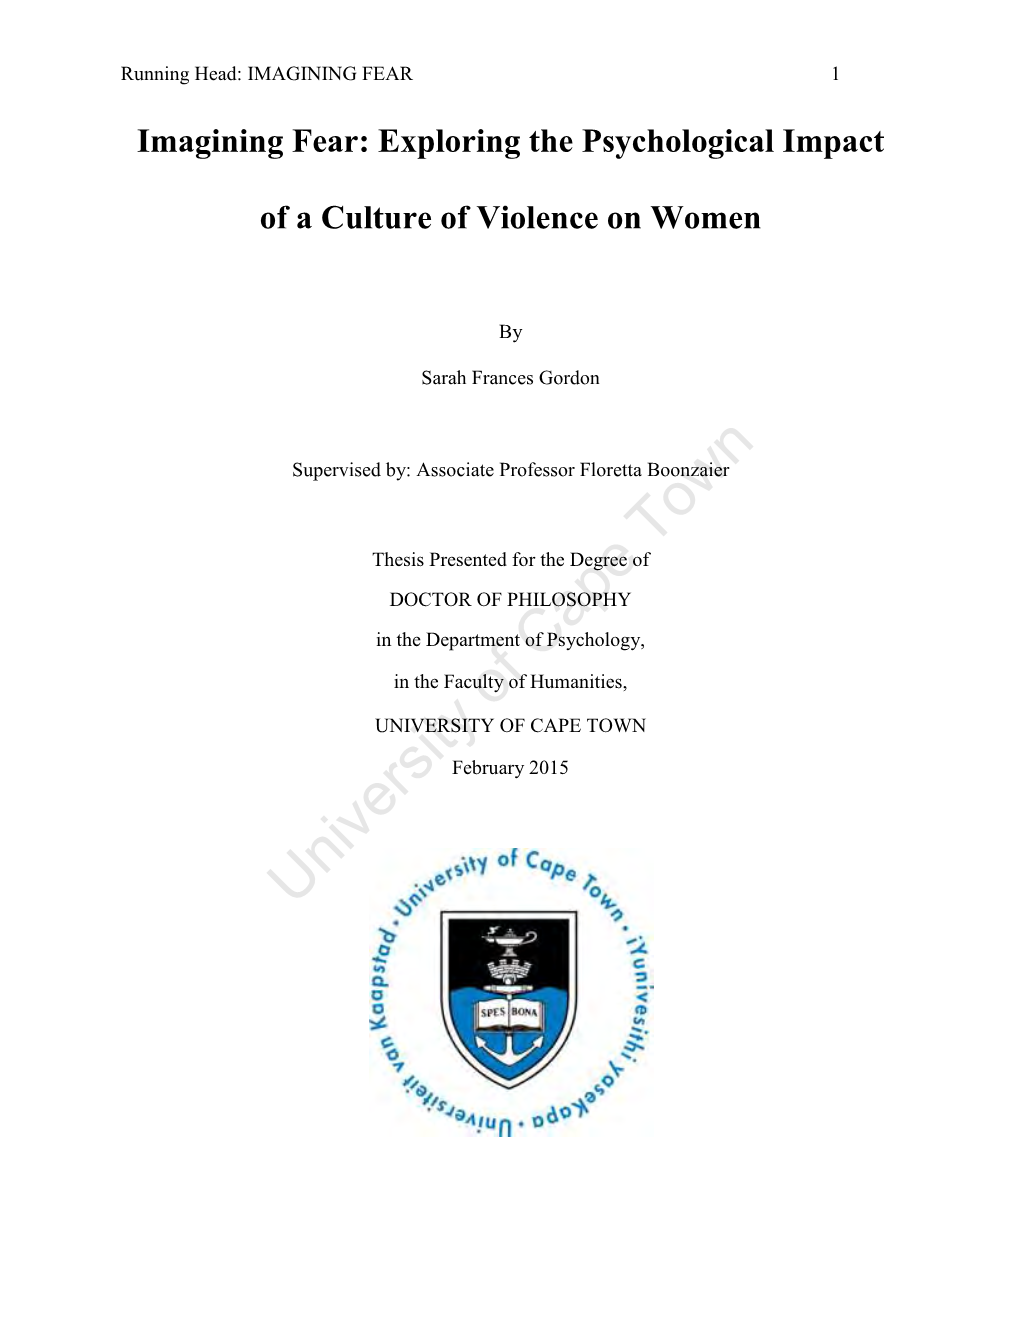 Exploring the Psychological Impact of a Culture of Violence on Women